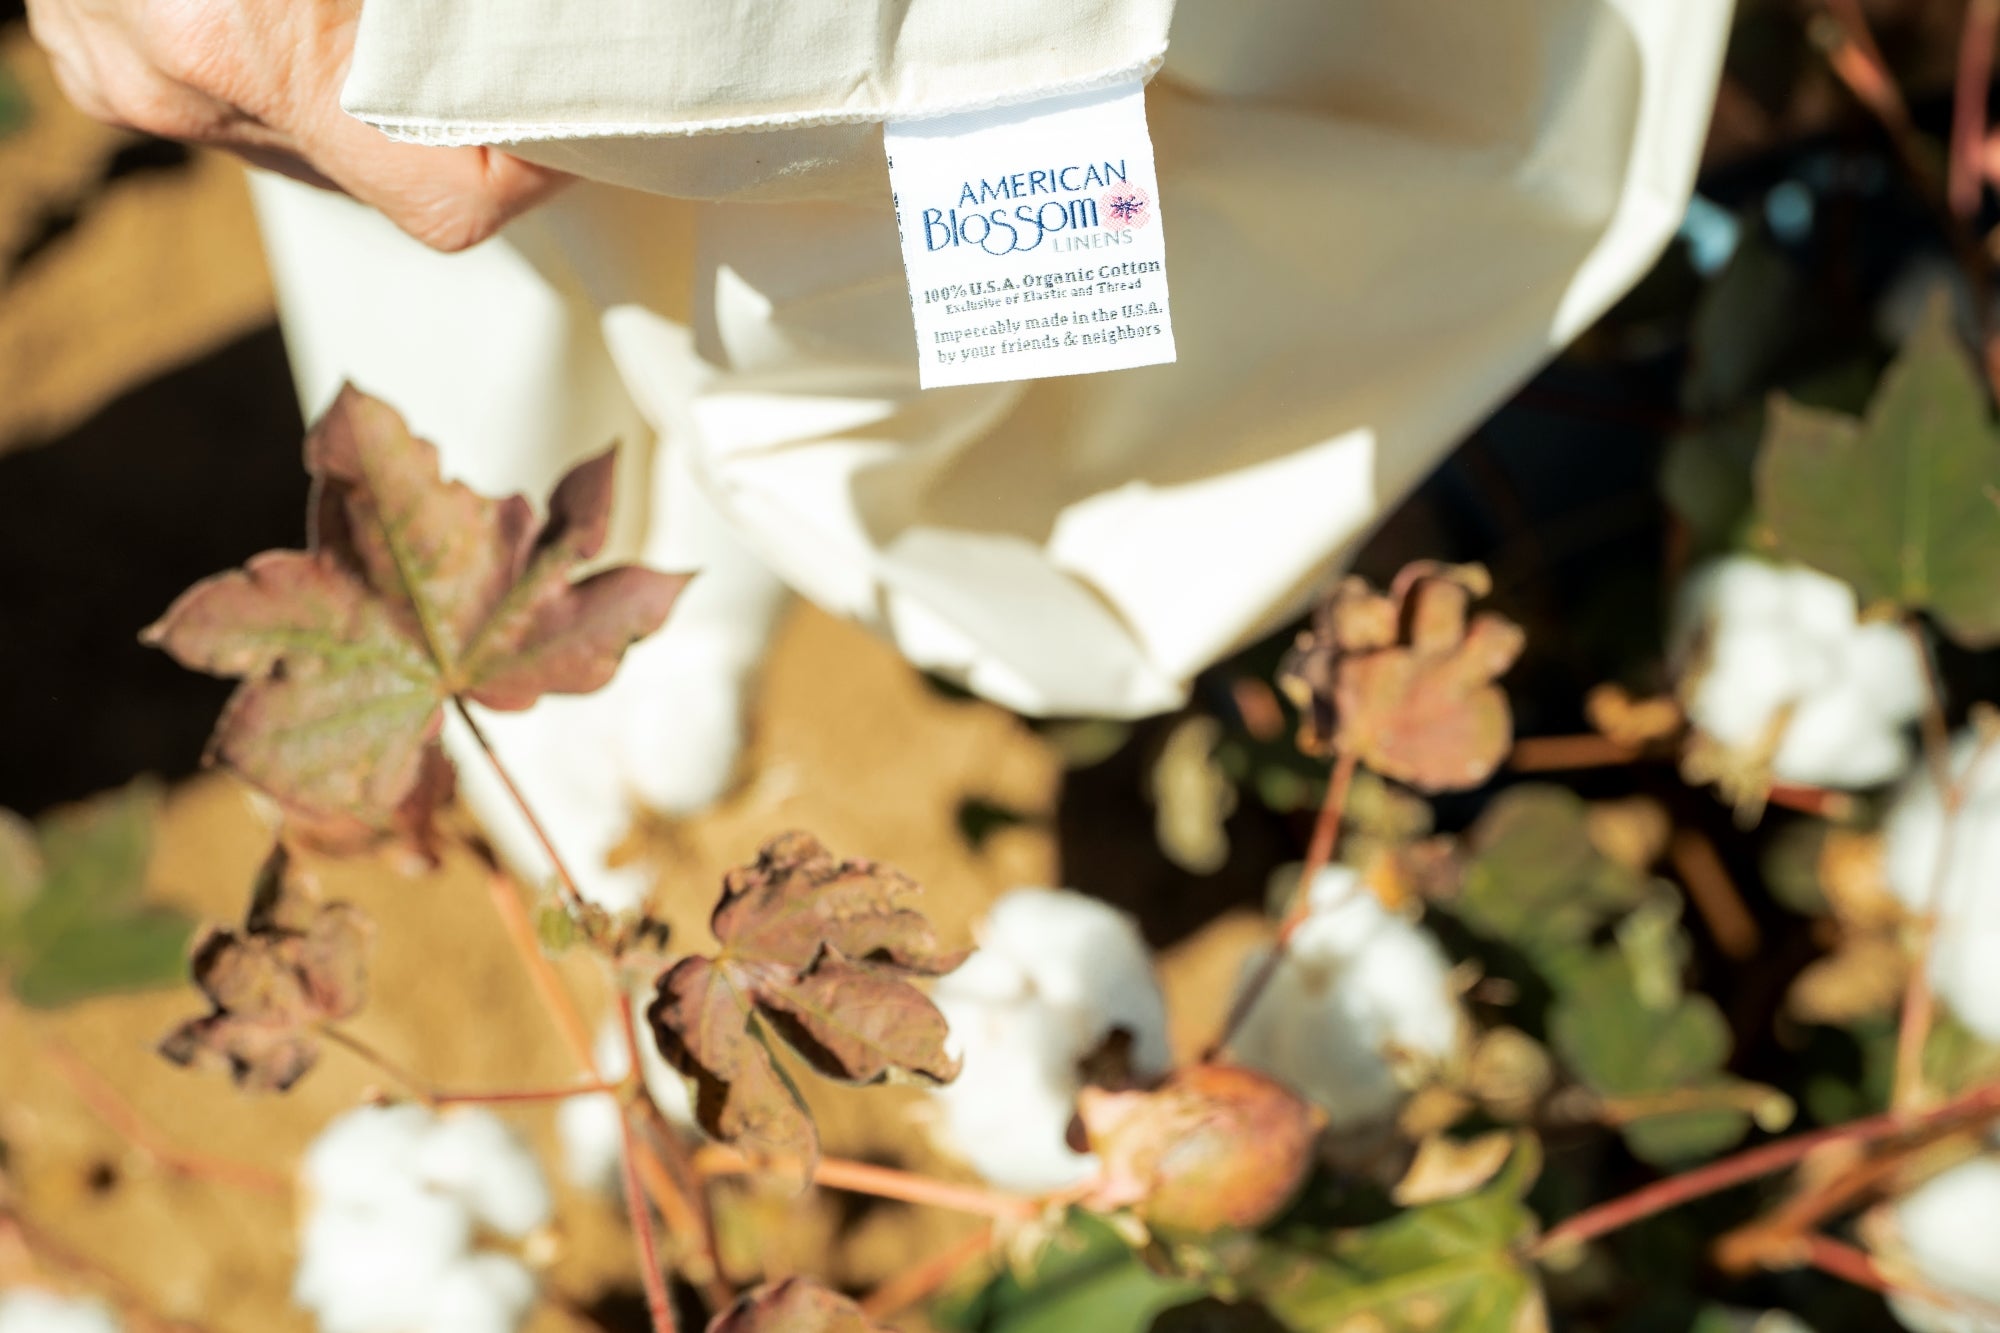 Does Organic Cotton Make a Difference